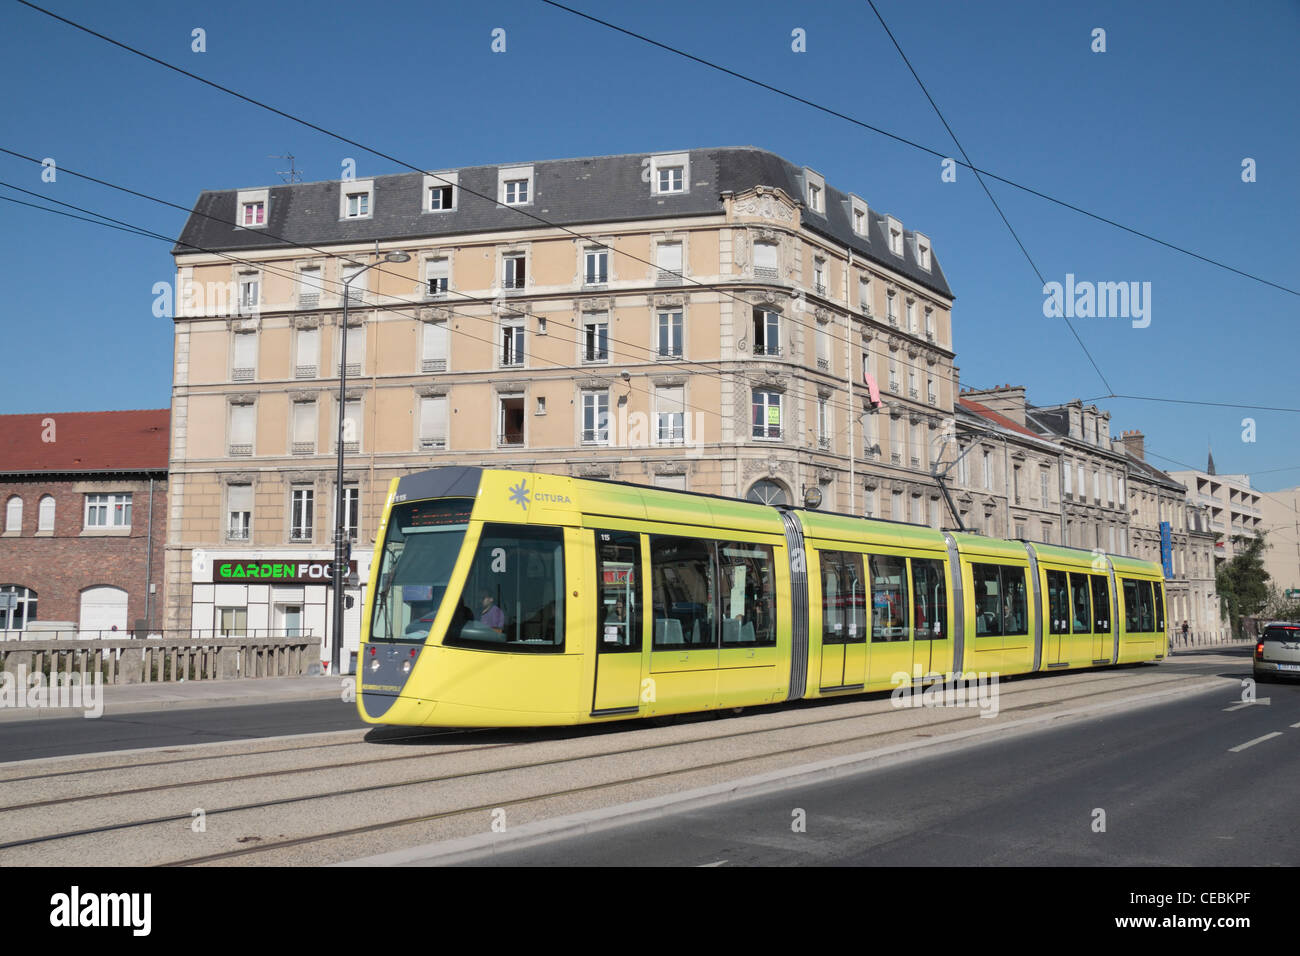 The bright yellow city tram (by Citura) on Av de Laon in Riems, Champagne-Ardenne, France. Stock Photo